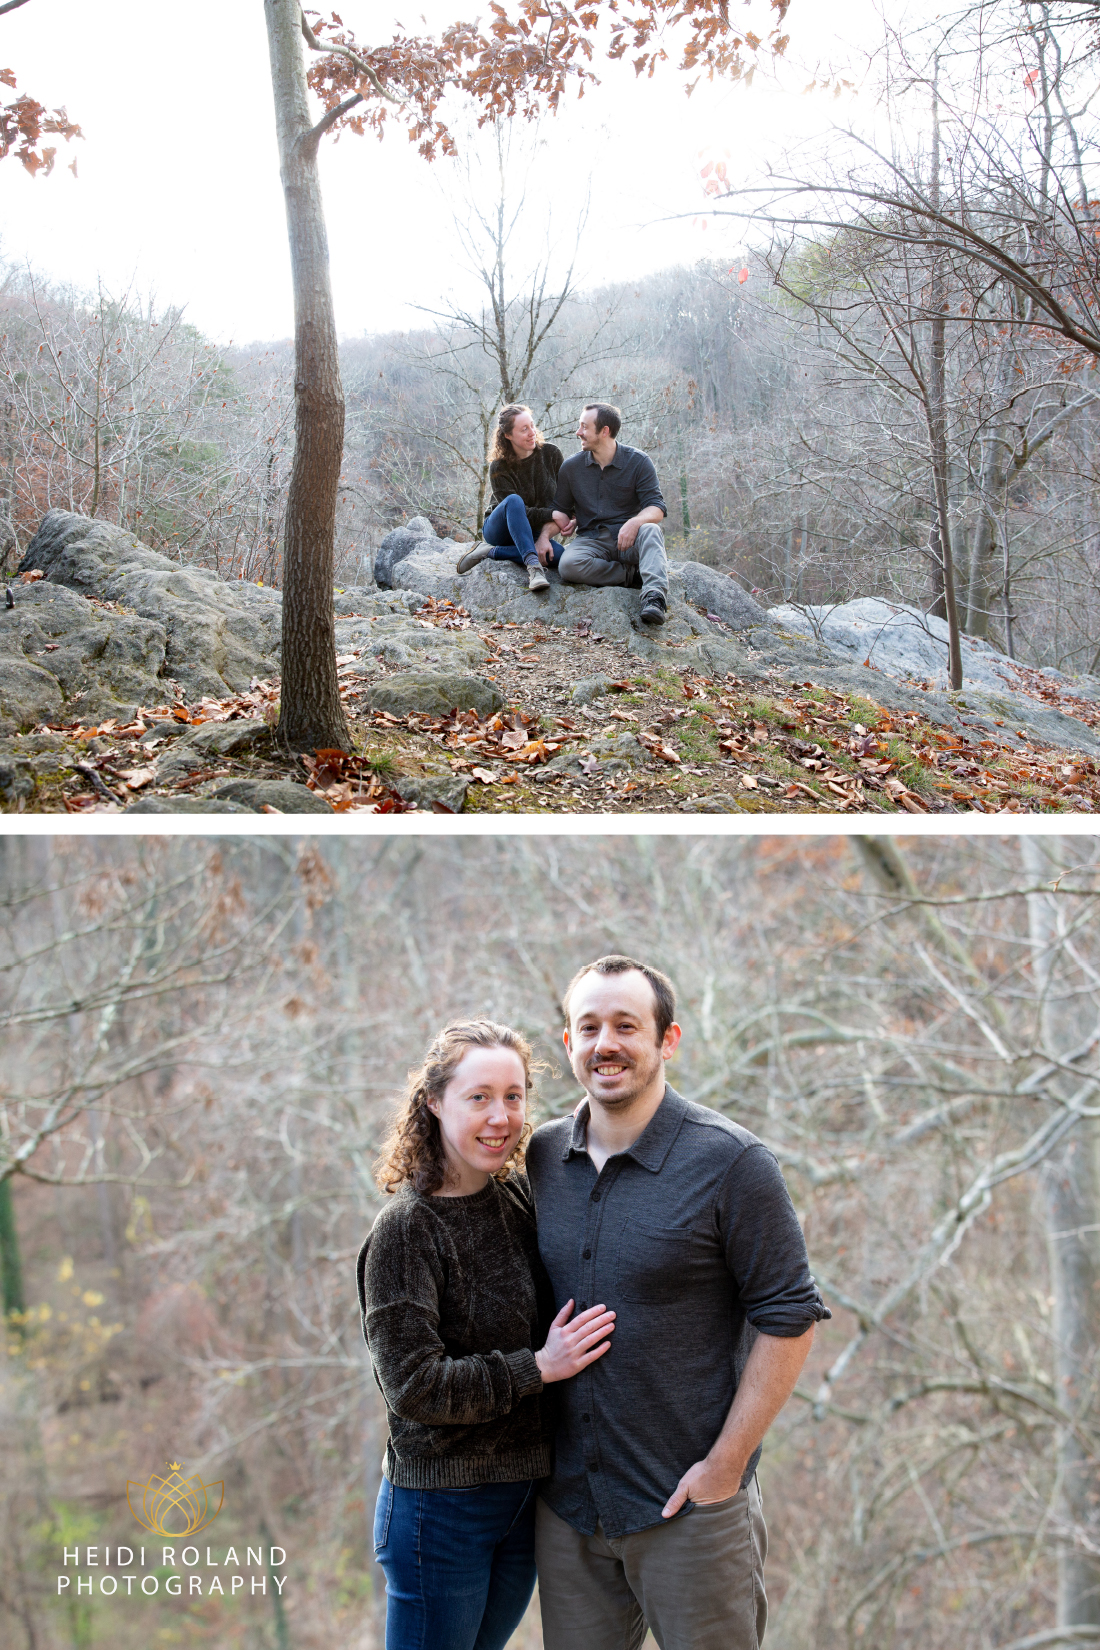 Engaged man and woman surrounded by fall leave in wissahickon valley park philadelphia